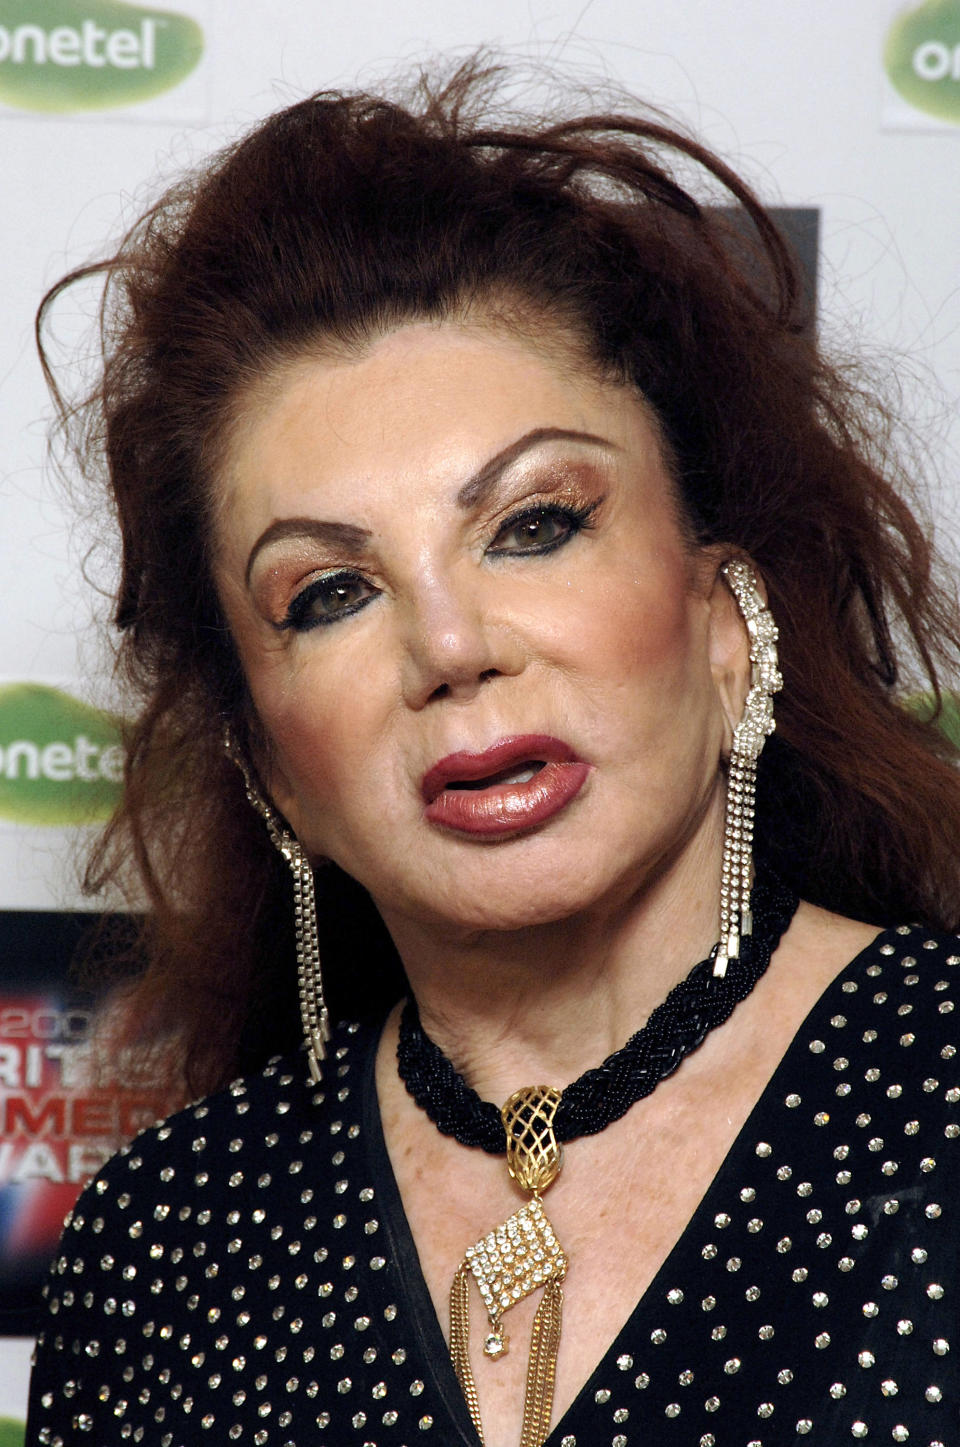 LONDON - DECEMBER 14:  (EMBARGOED FOR PUBLICATION IN UK TABLOID NEWSPAPERS UNTIL 48 HOURS AFTER CREATE DATE AND TIME)  Jackie Stallone arrives for the British Comedy Awards 2005 at London Television Studios on December 14, 2005 in London, England.  (Photo by Dave M. Benett/Getty Images)